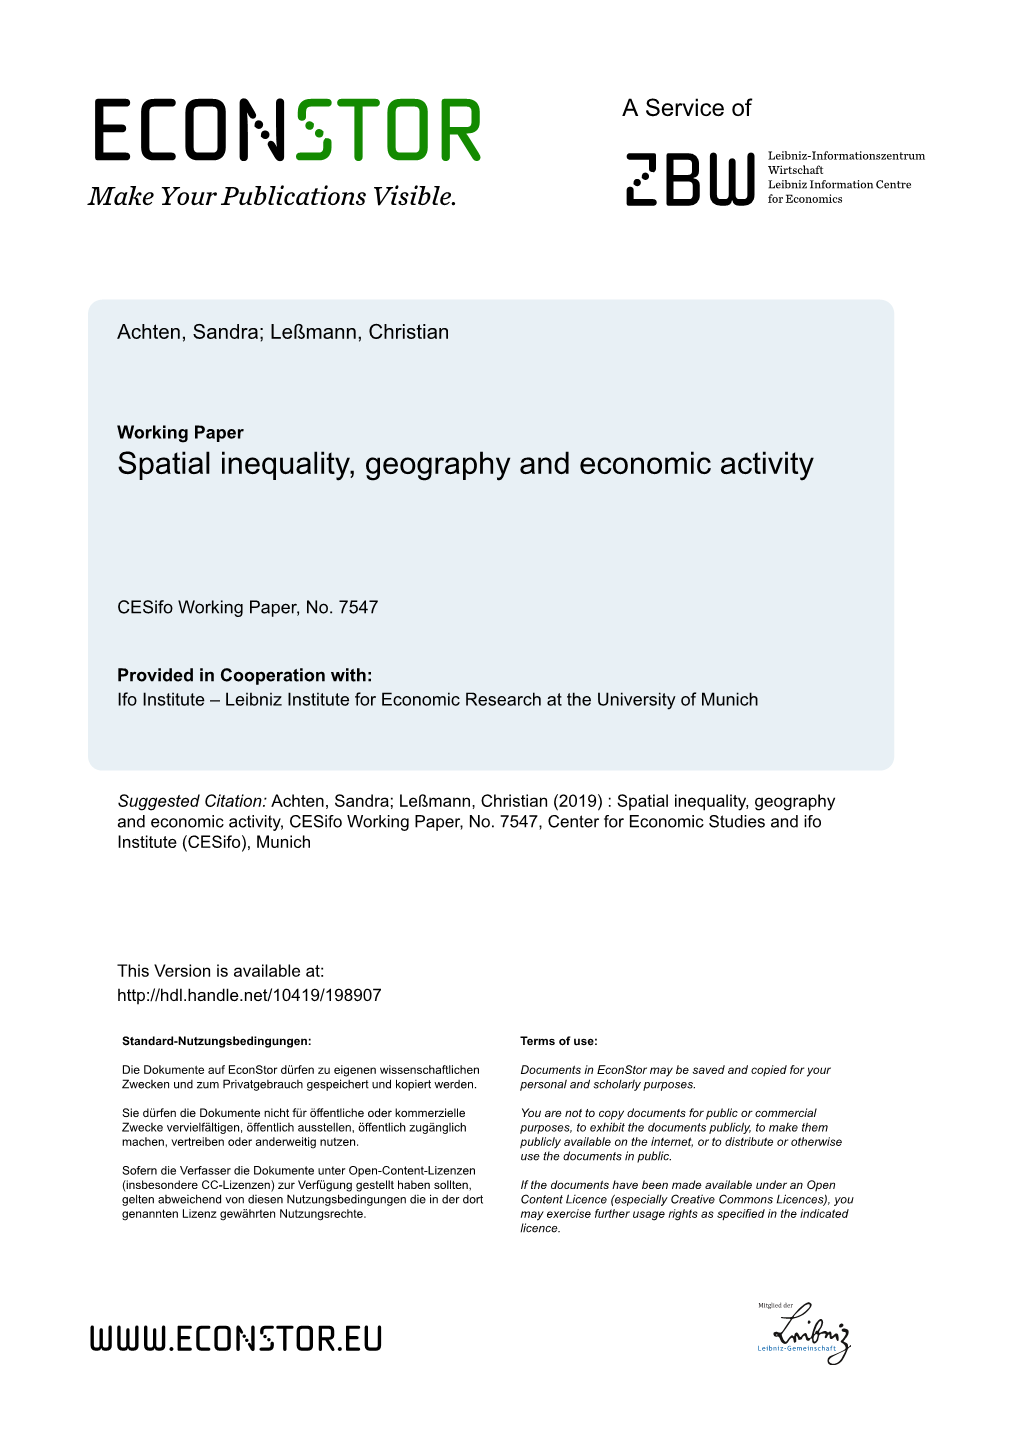 Spatial Inequality, Geography and Economic Activity